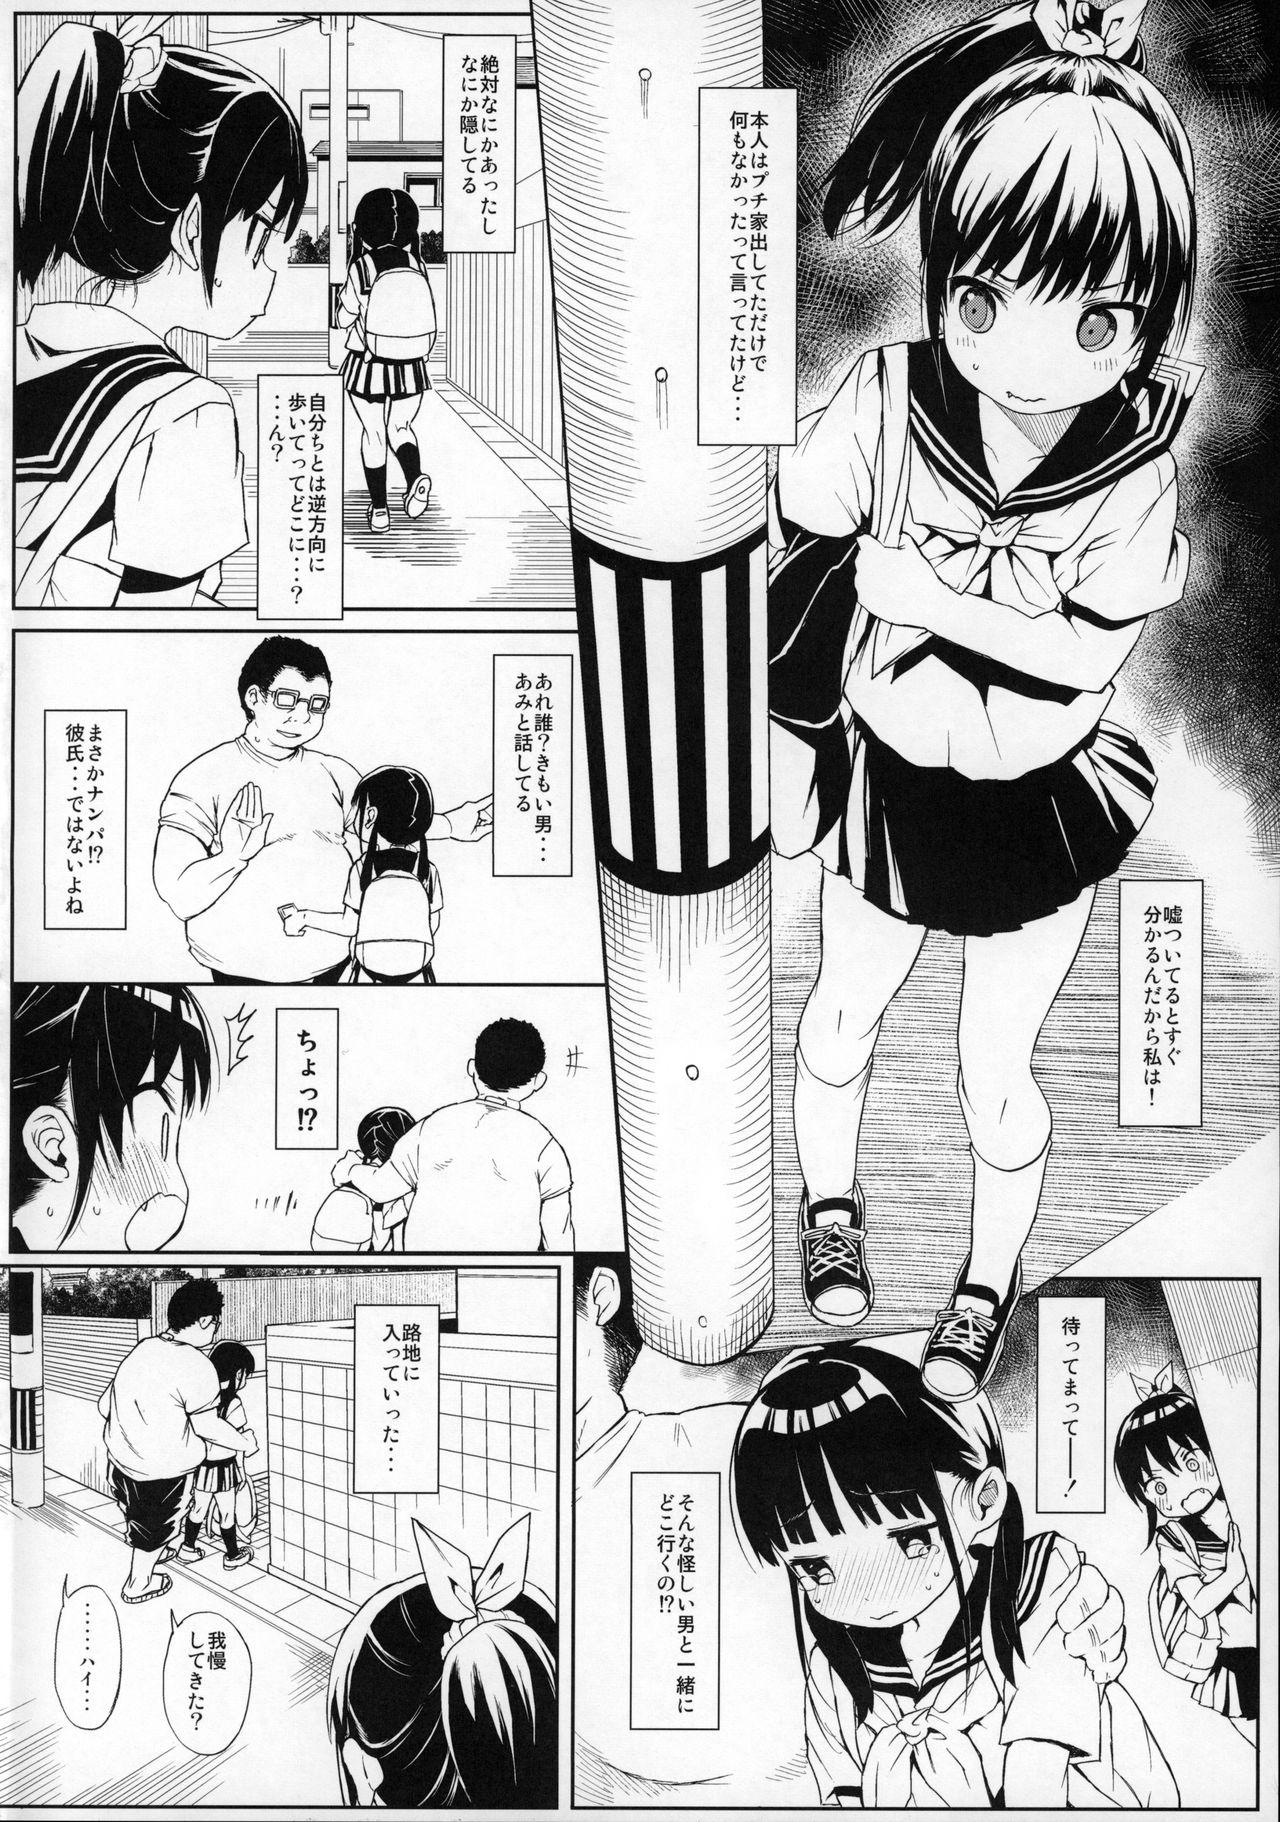 Stepbrother Comike no Omake Matome part 1 Foot Worship - Page 5